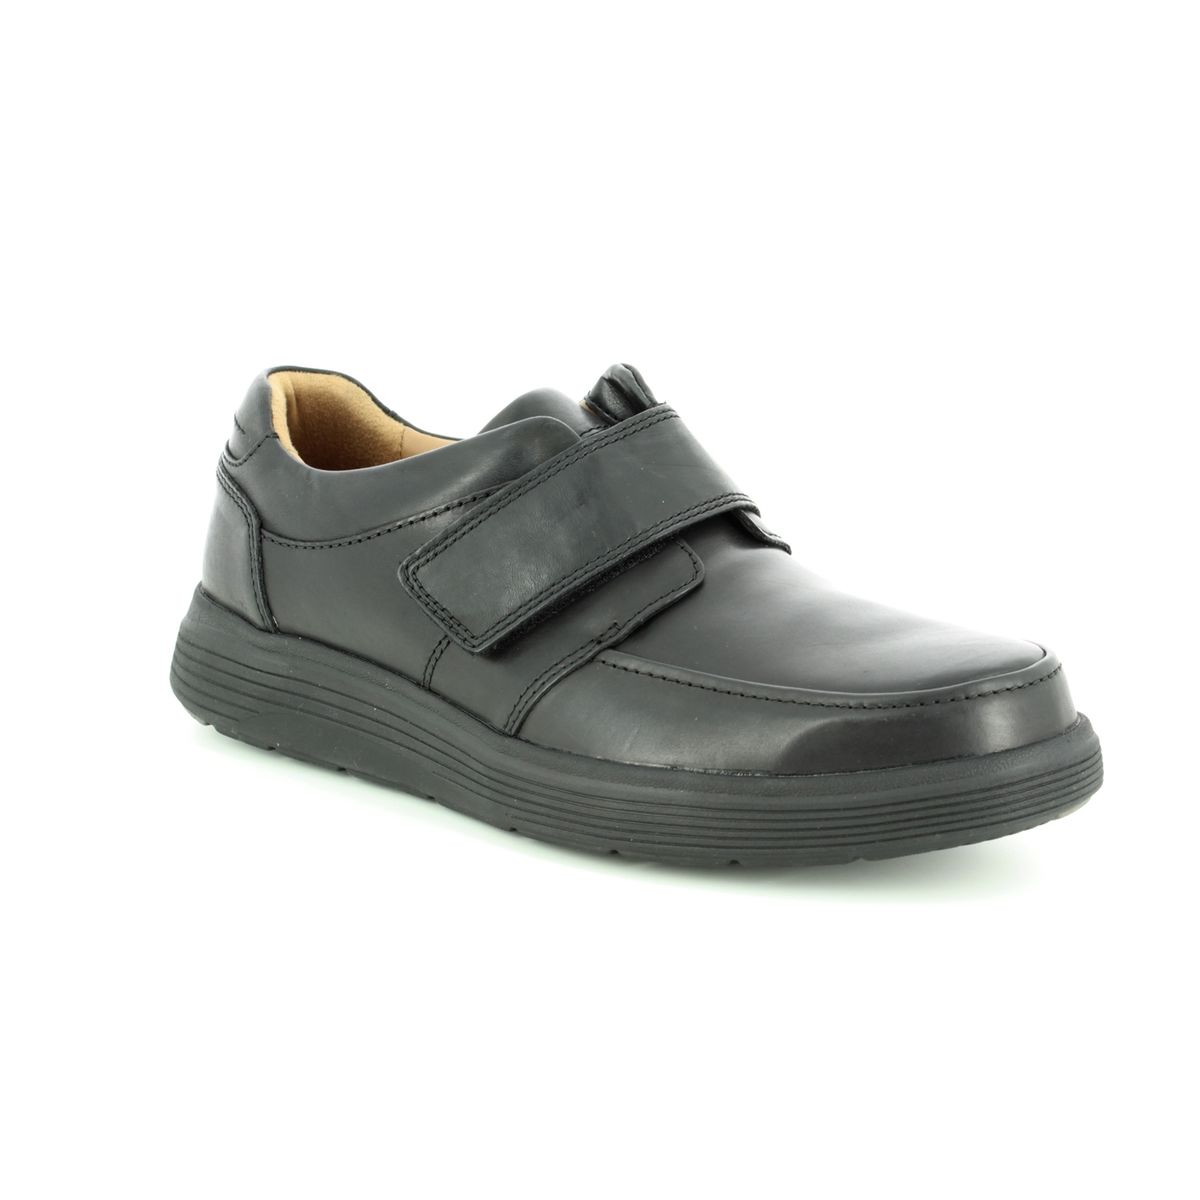 Clarks Un Abode Strap Black Leather Mens Comfort Shoes 3698-68H In Size 6.5 In Plain Black Leather H Width Fitting Extra Wide